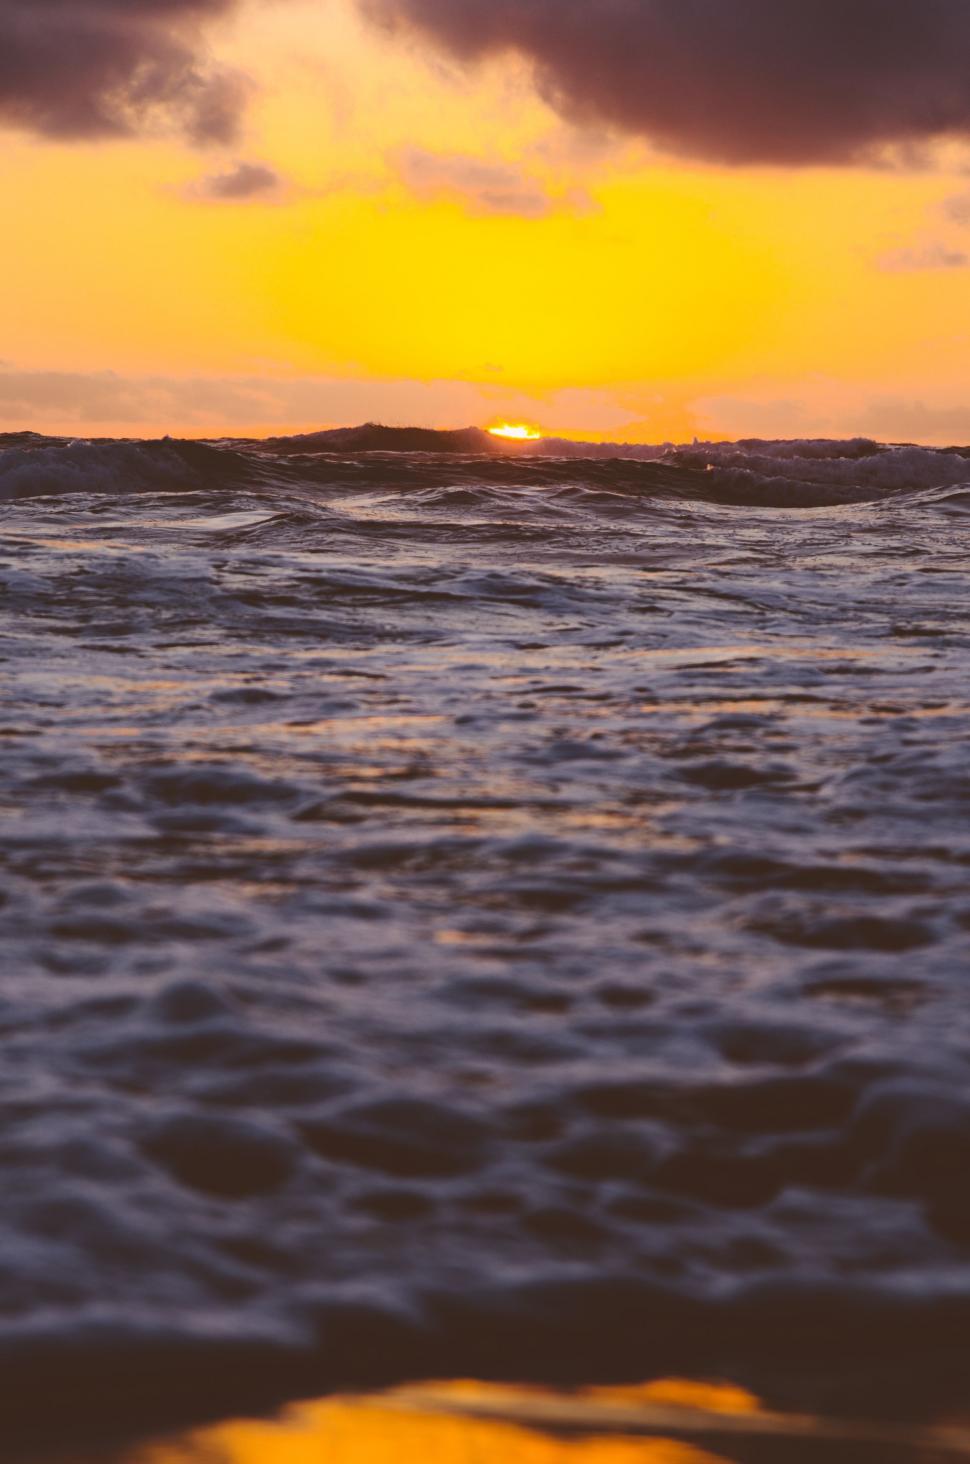 Free Image of Sun Setting Over Ocean Waves 